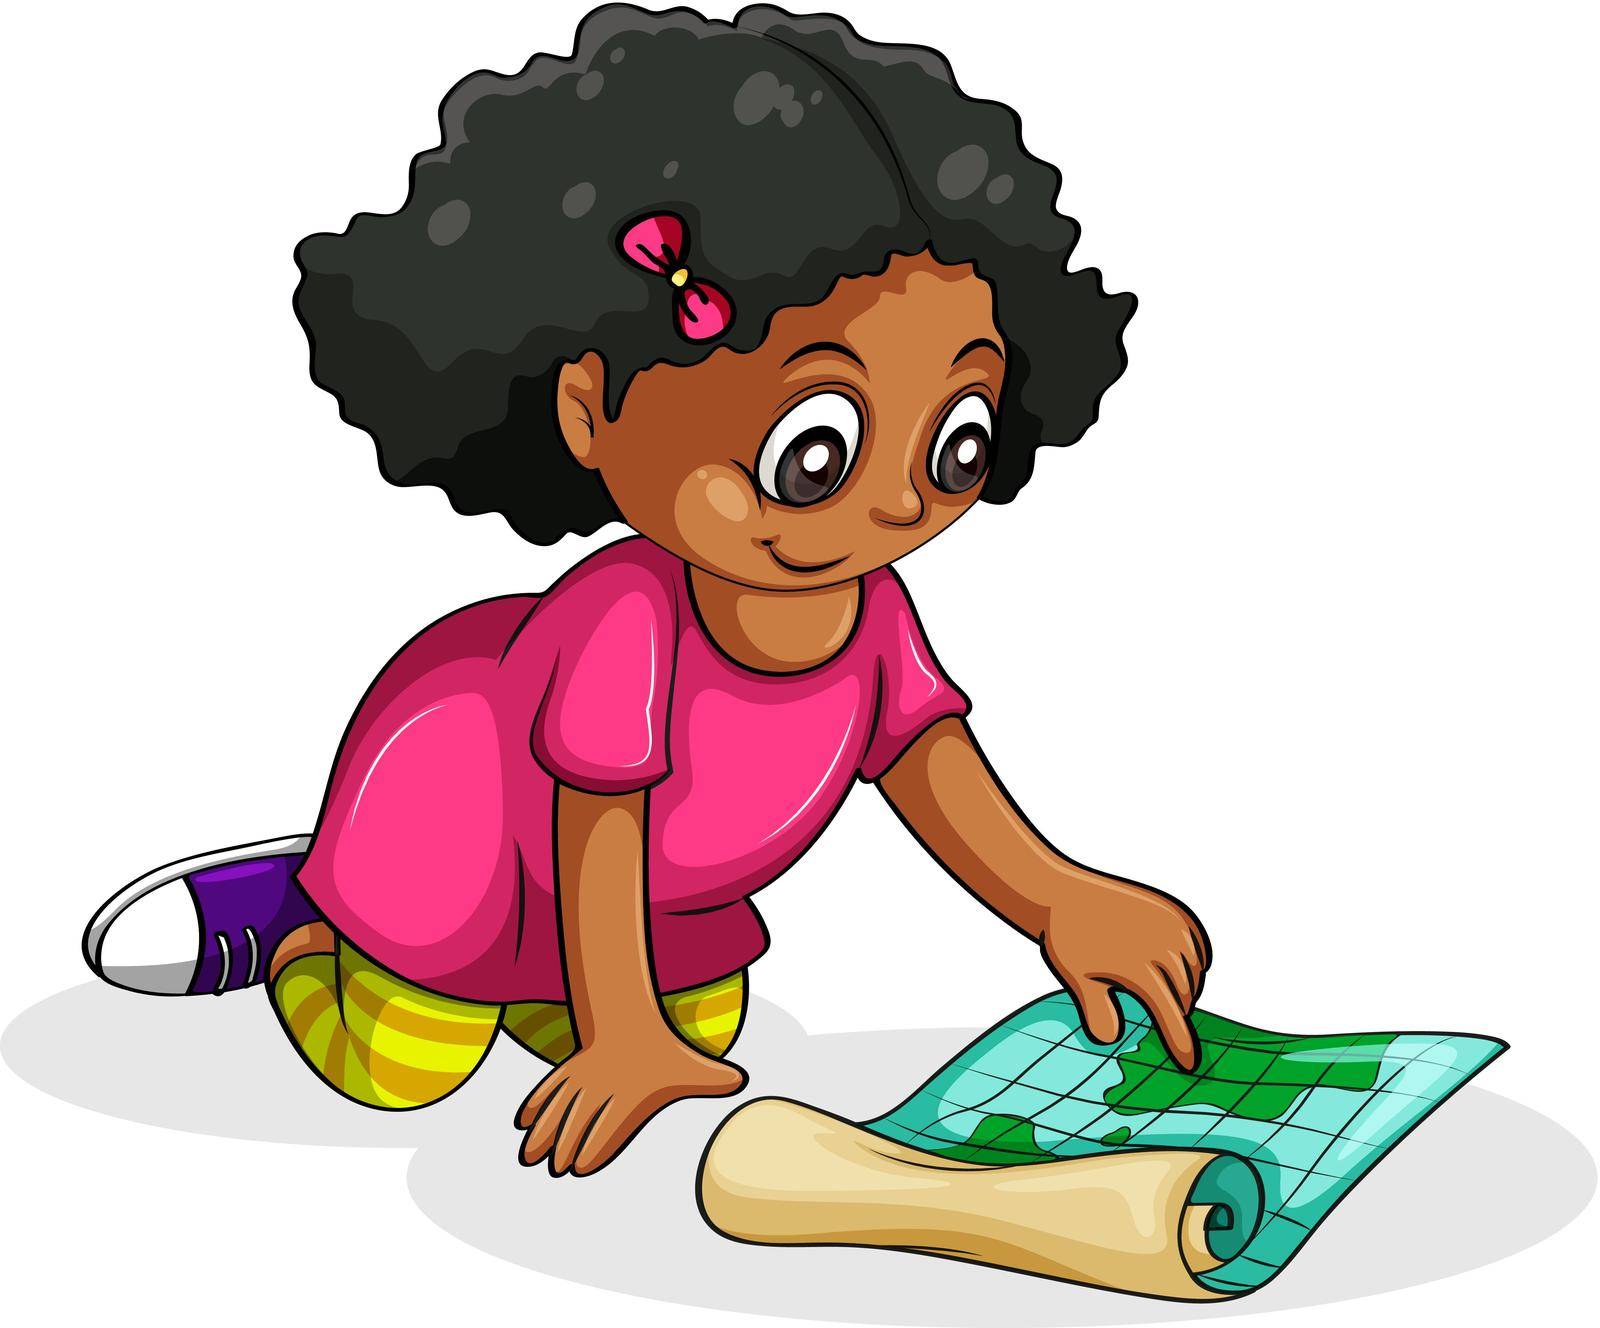 Illustration of a Black young girl studying on a white background